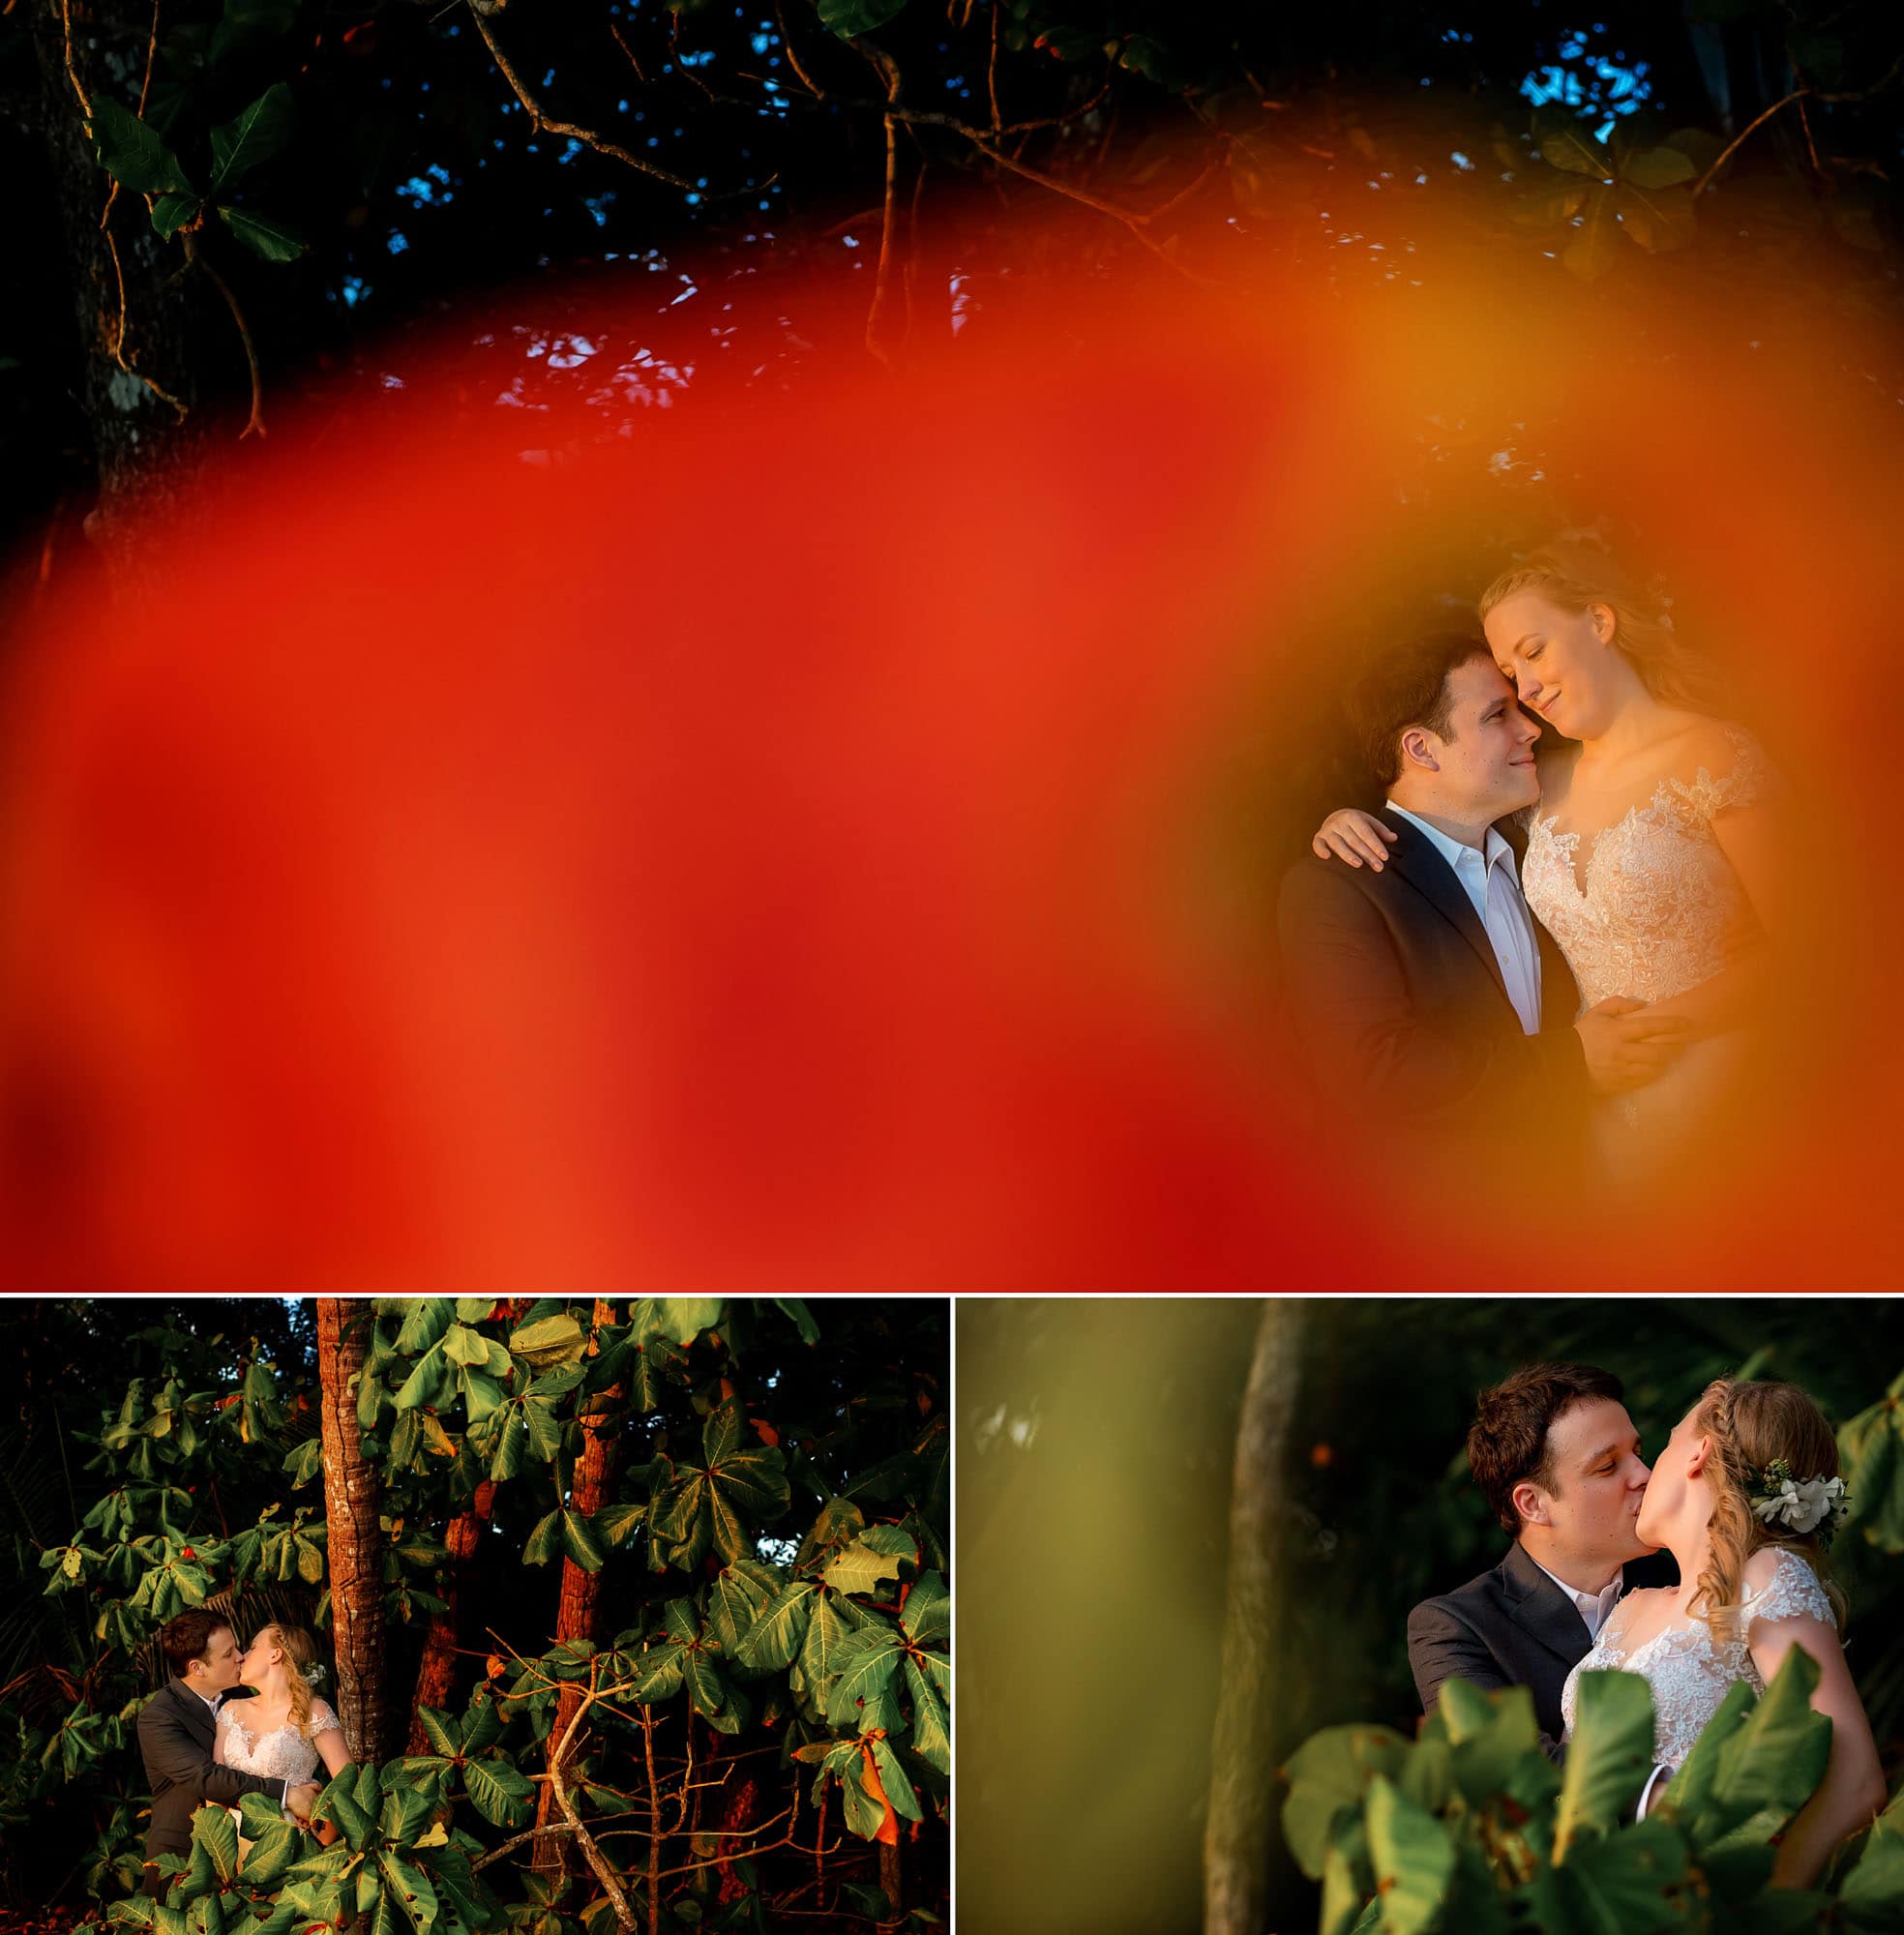 Creative Wedding Photography: Shooting through things to spotlight on the couple